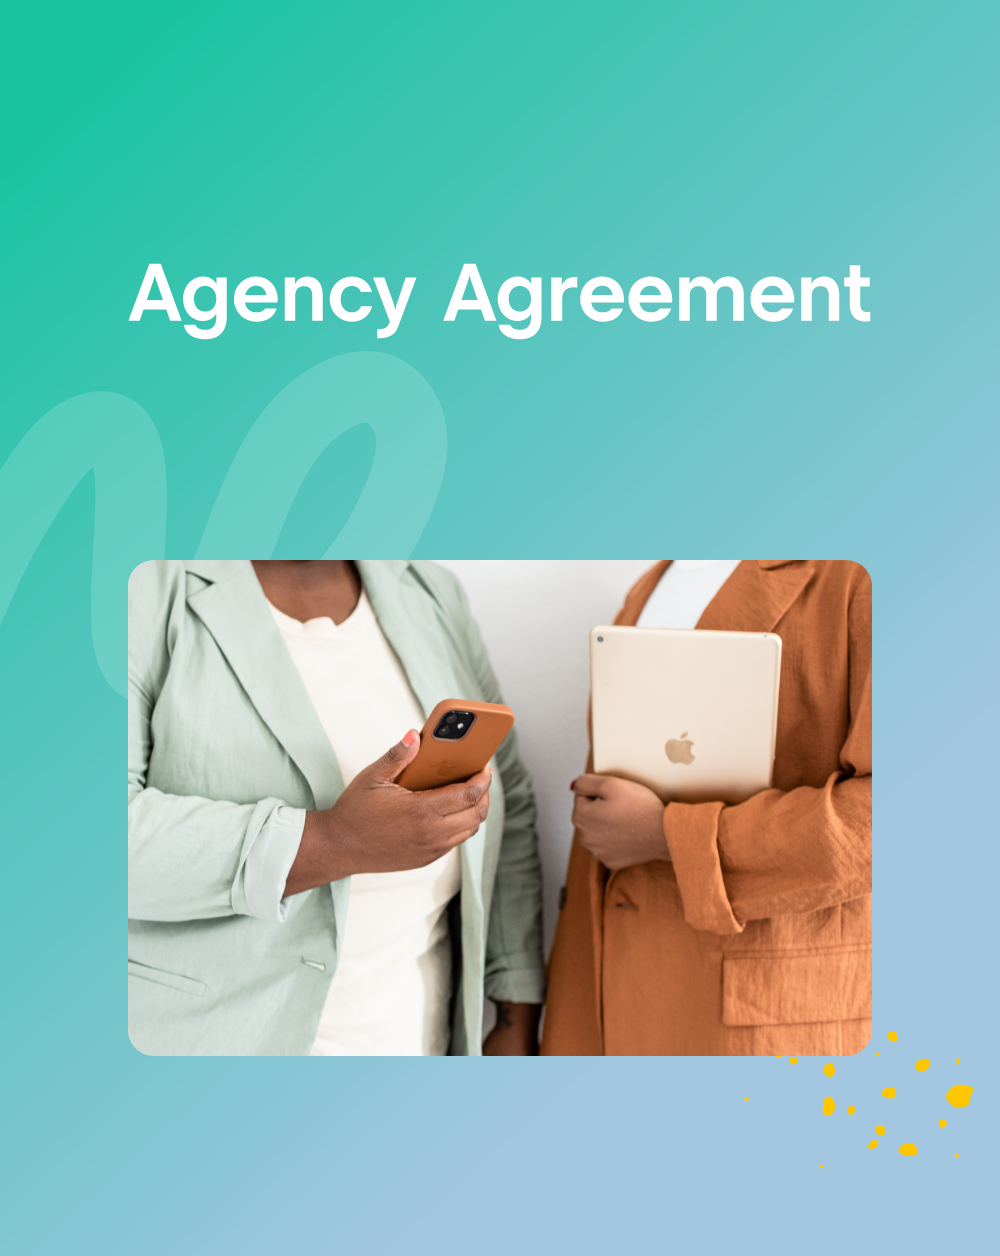 Agency Agreement Contract Template - The Contract Shop®